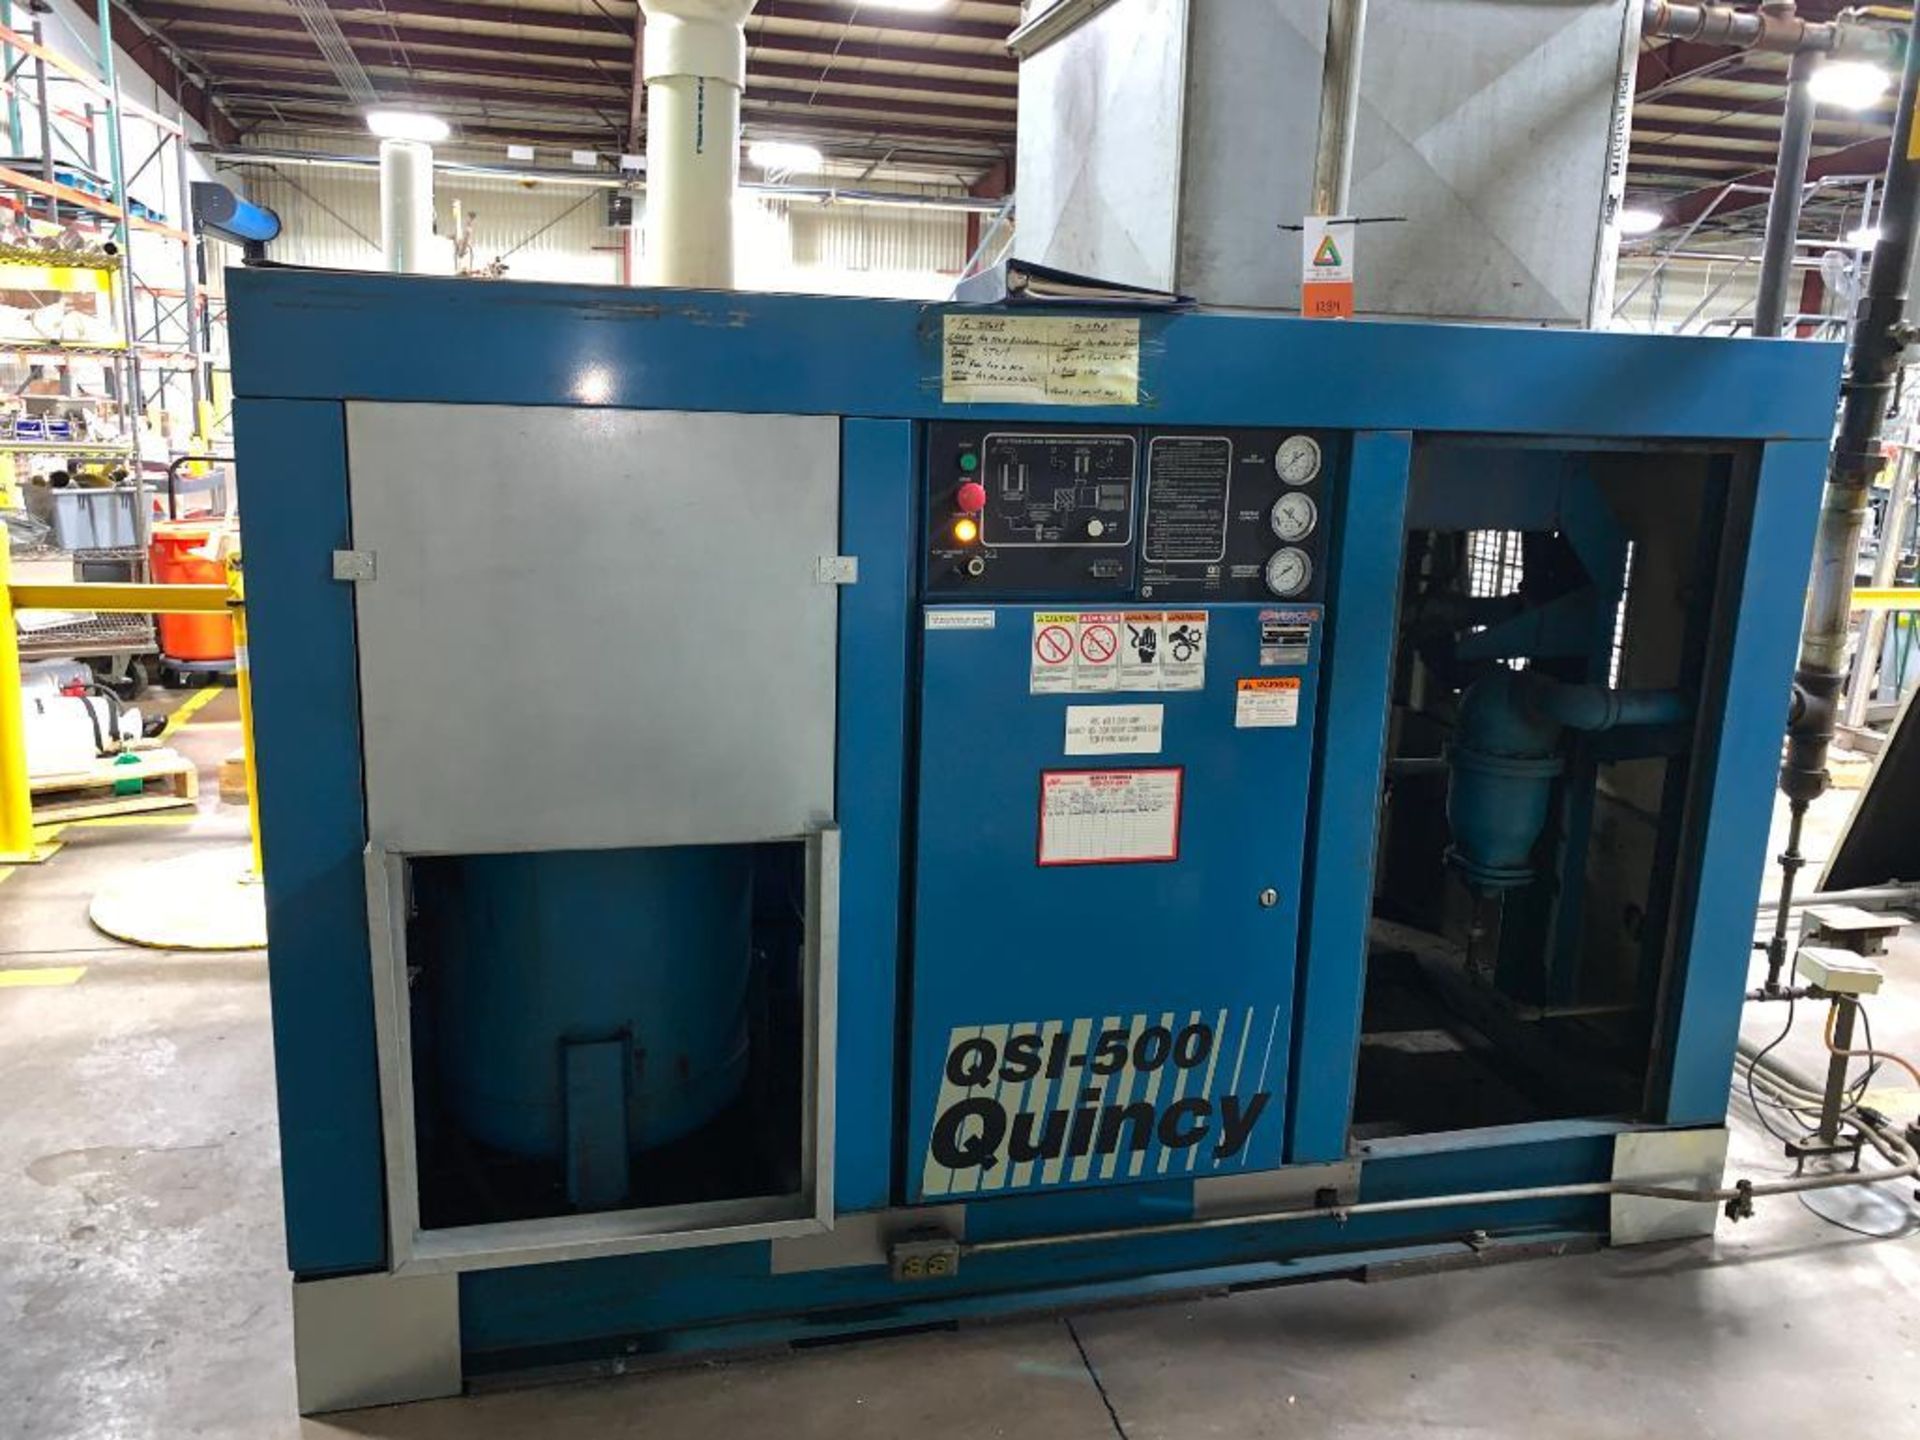 Quincy rotary screw air compressor, model QSI-500, sn 94210H, 70,900 hours, 100 hp